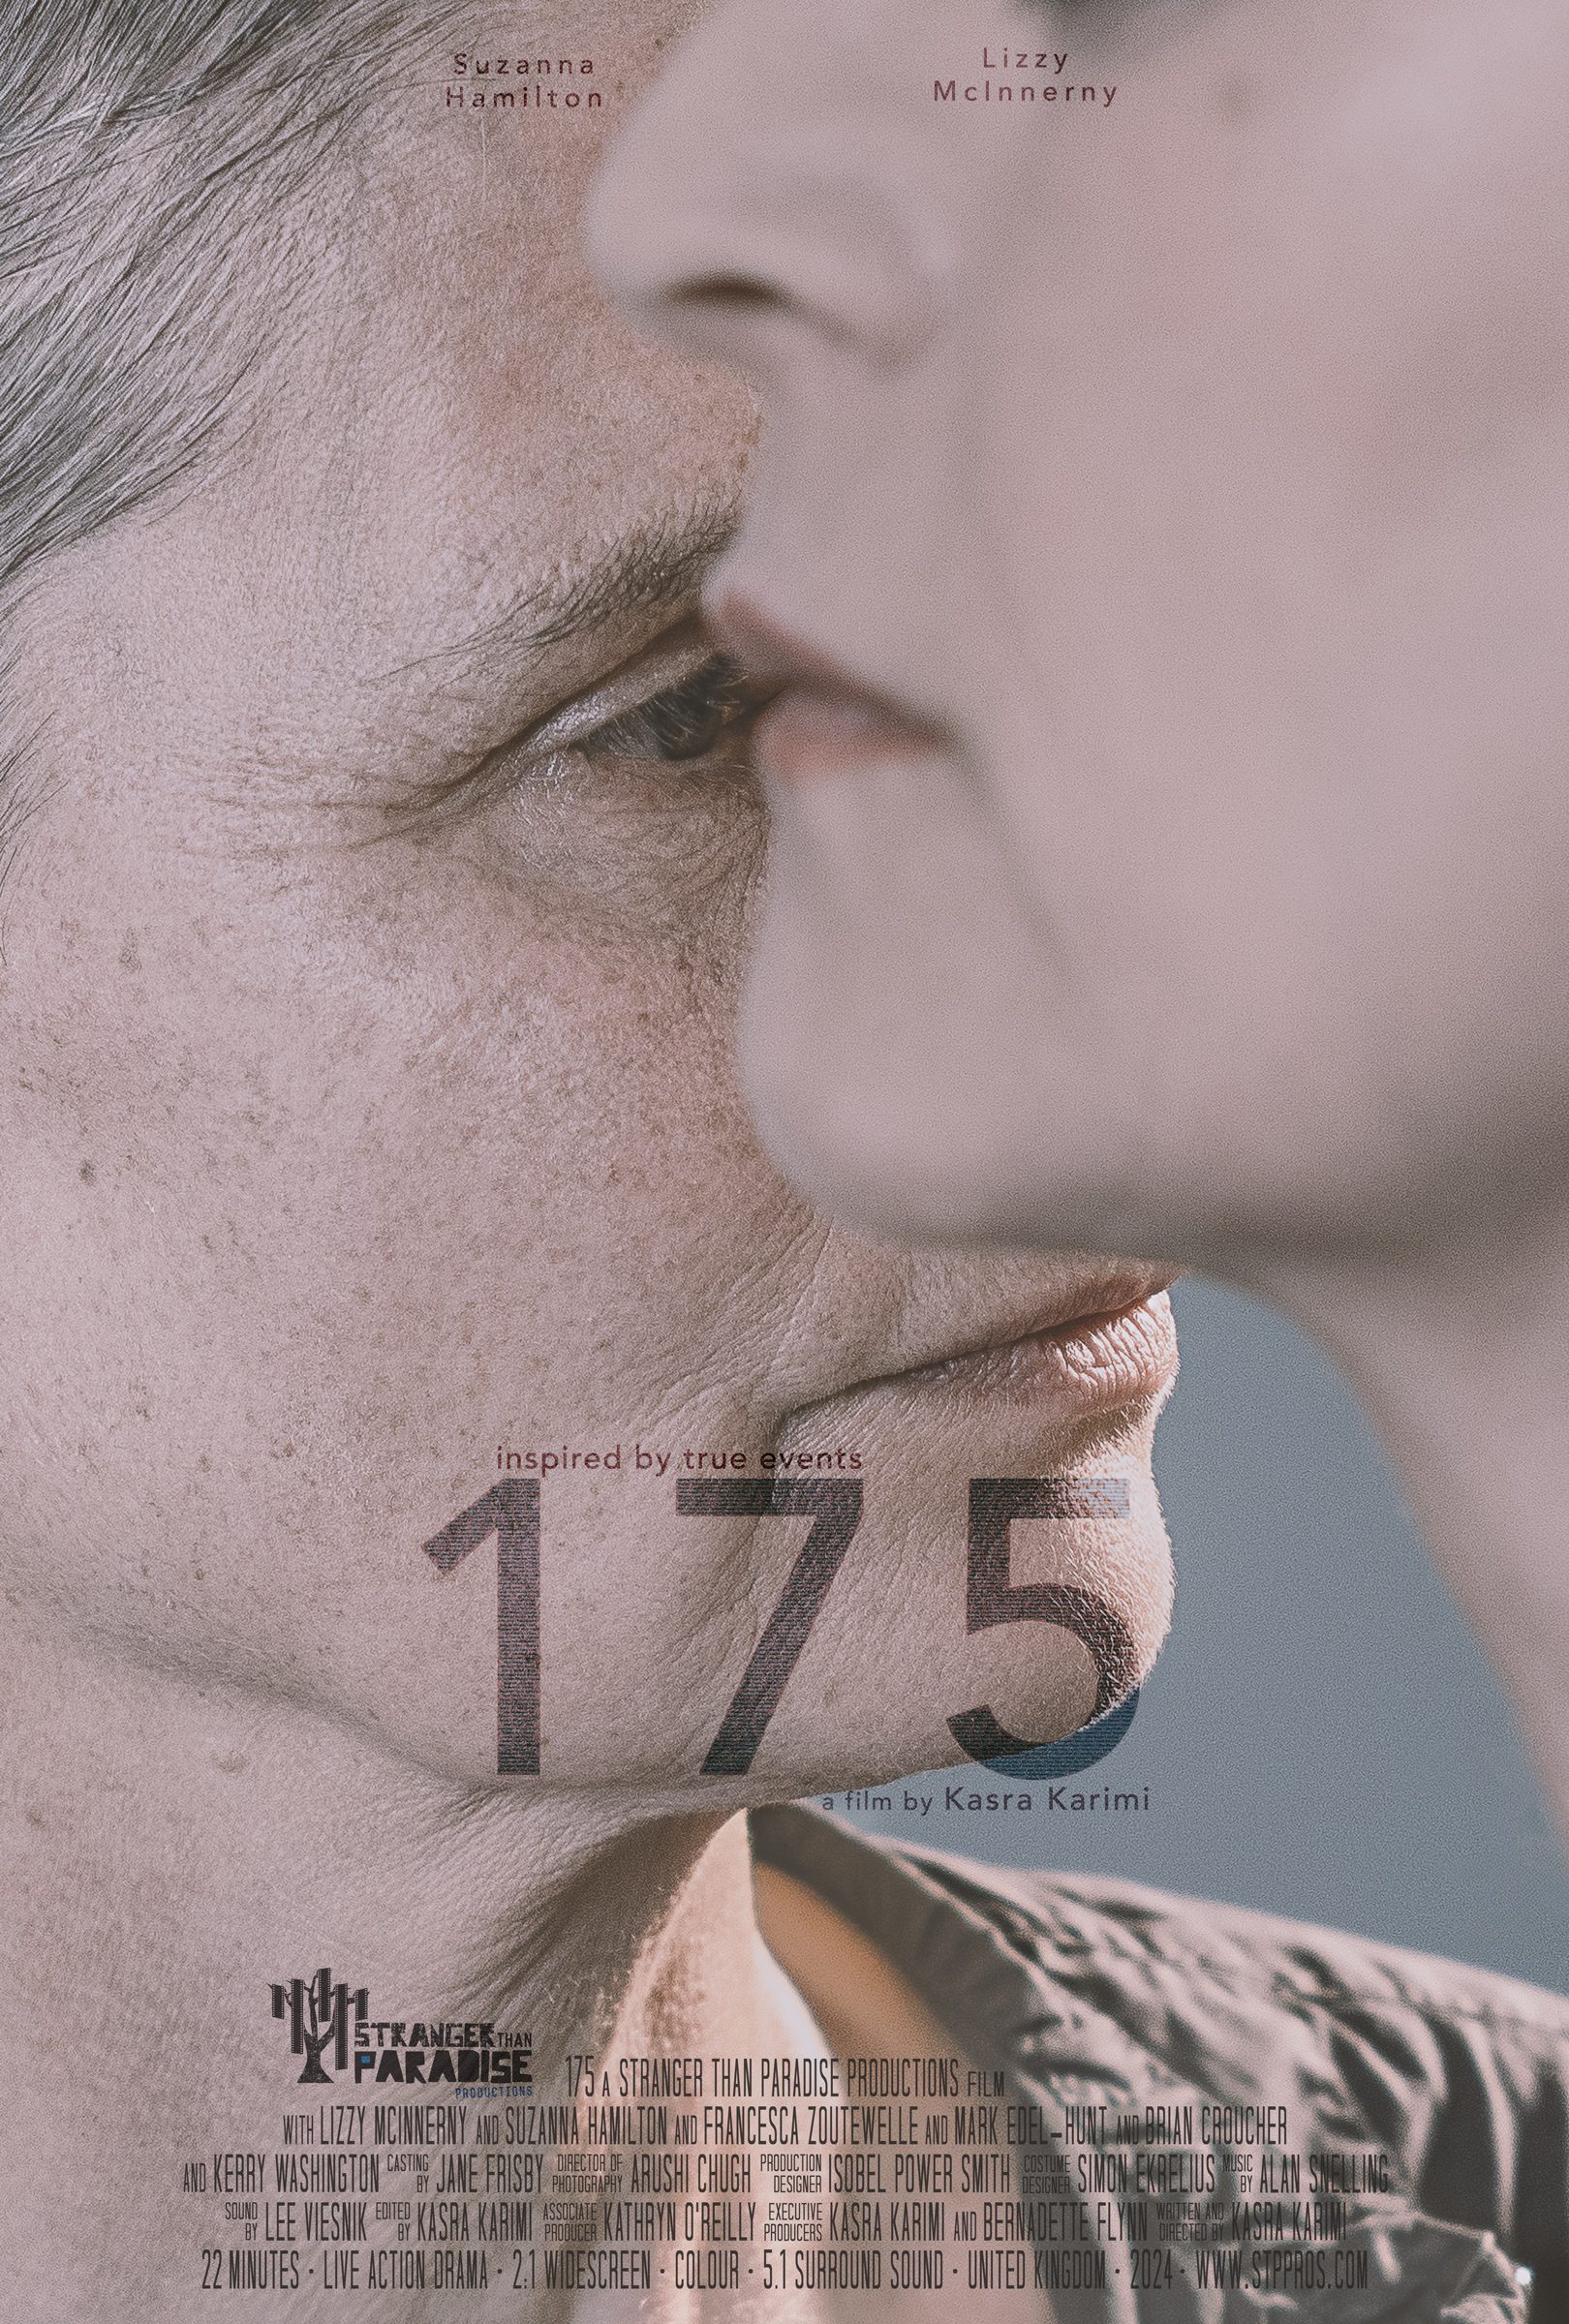 175 short film, written and directed by Kasra Karimi, starring Lizzy McInnerny, Suzanna Hamilton, Francesca Zoutewelle, Mark Edel-Hunt, Brian Croucher, Kerry Washington. This is a Stranger Than Paradise Productions film. “175′ is a 22-minute live action drama. It was filmed in Kent, England. Inspired by true events, ‘175’ is a personal and poignant love story that focuses on a few months prior to the legalisation of same-sex marriage in the United Kingdom in early 2013.